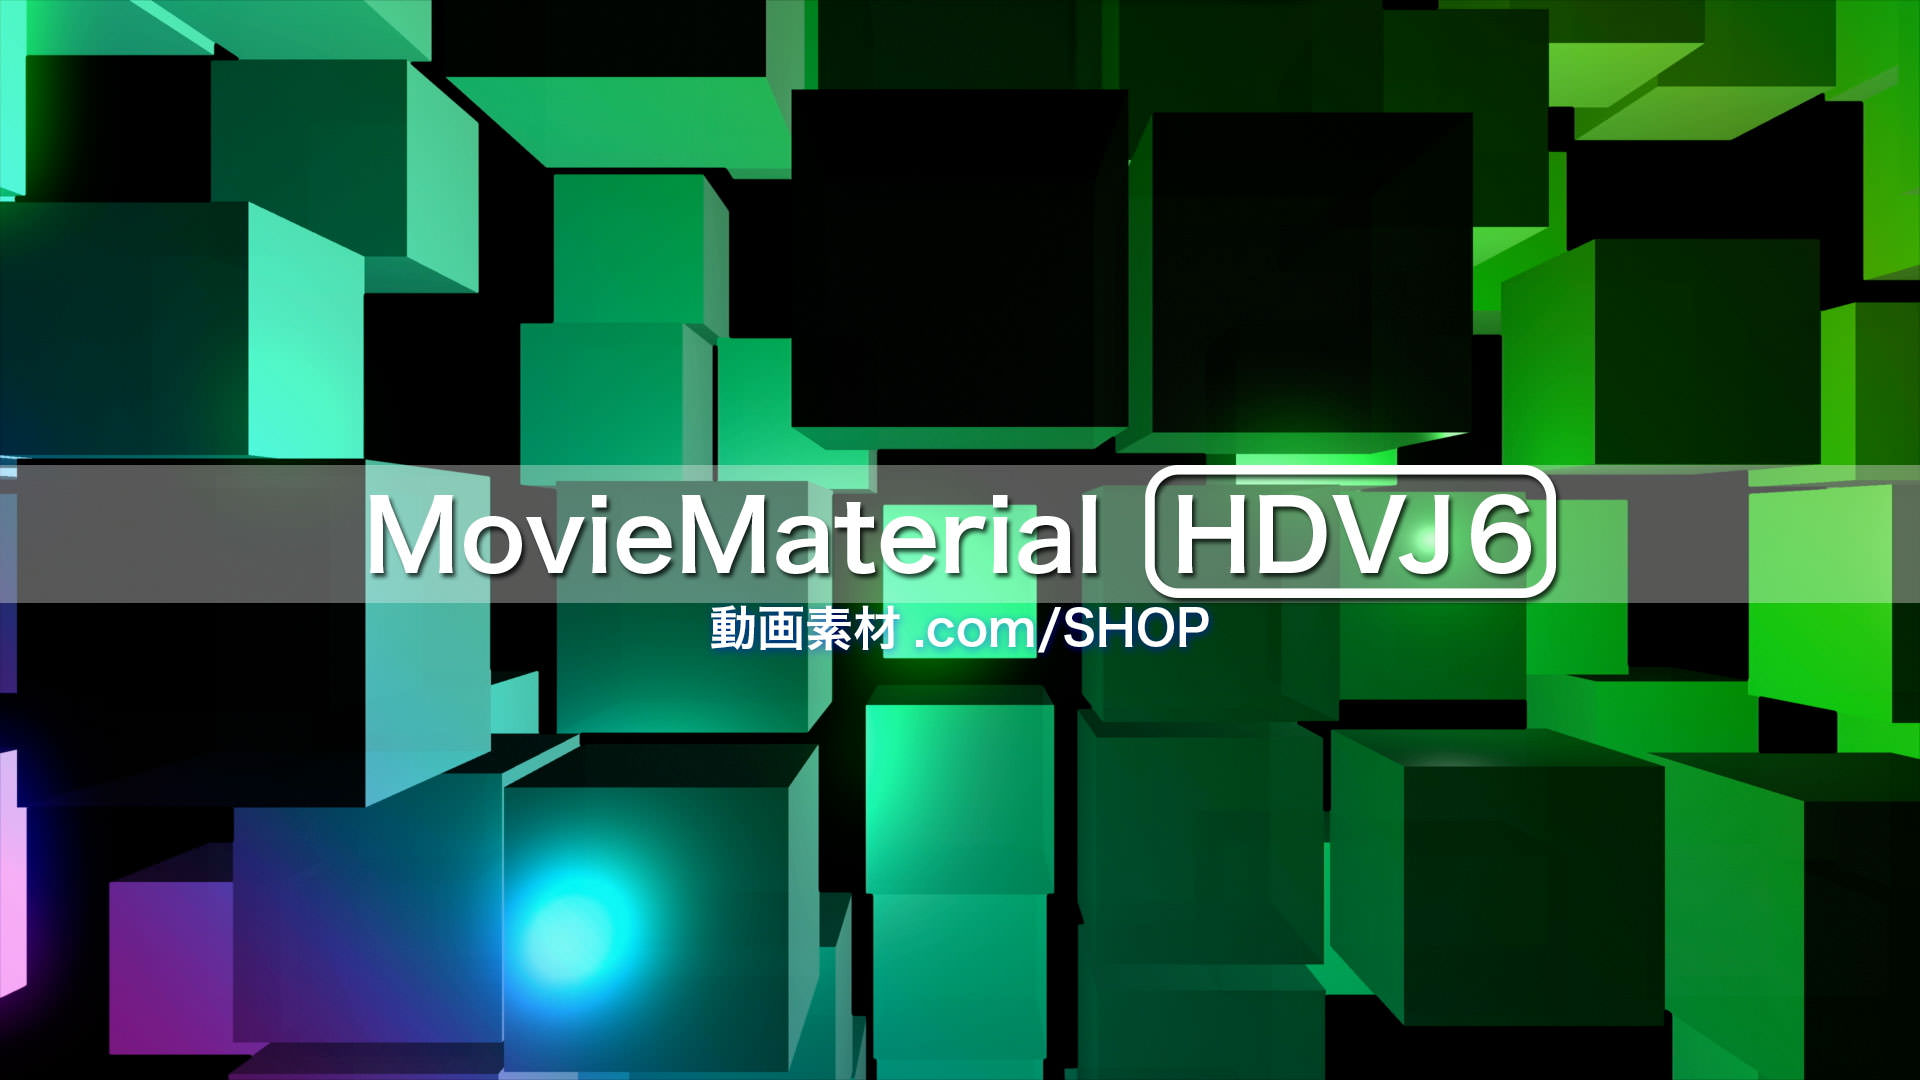 【MovieMaterial HDVJ6】フルハイビジョン動画素材集23